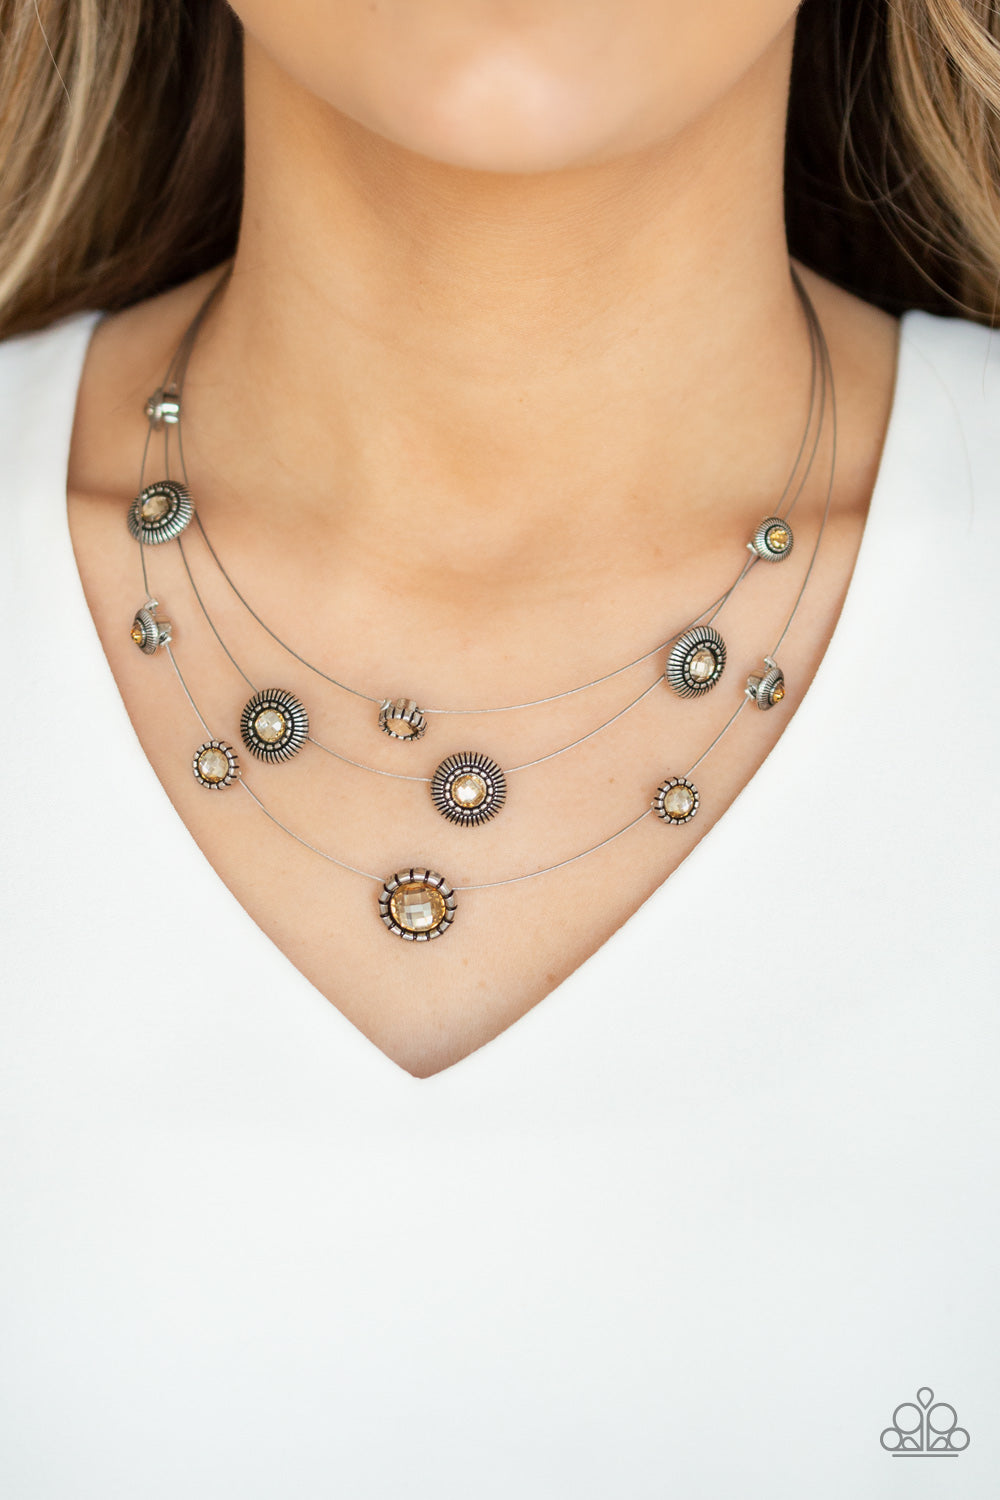 SHEER Thing! Necklace (Brown, Silver)